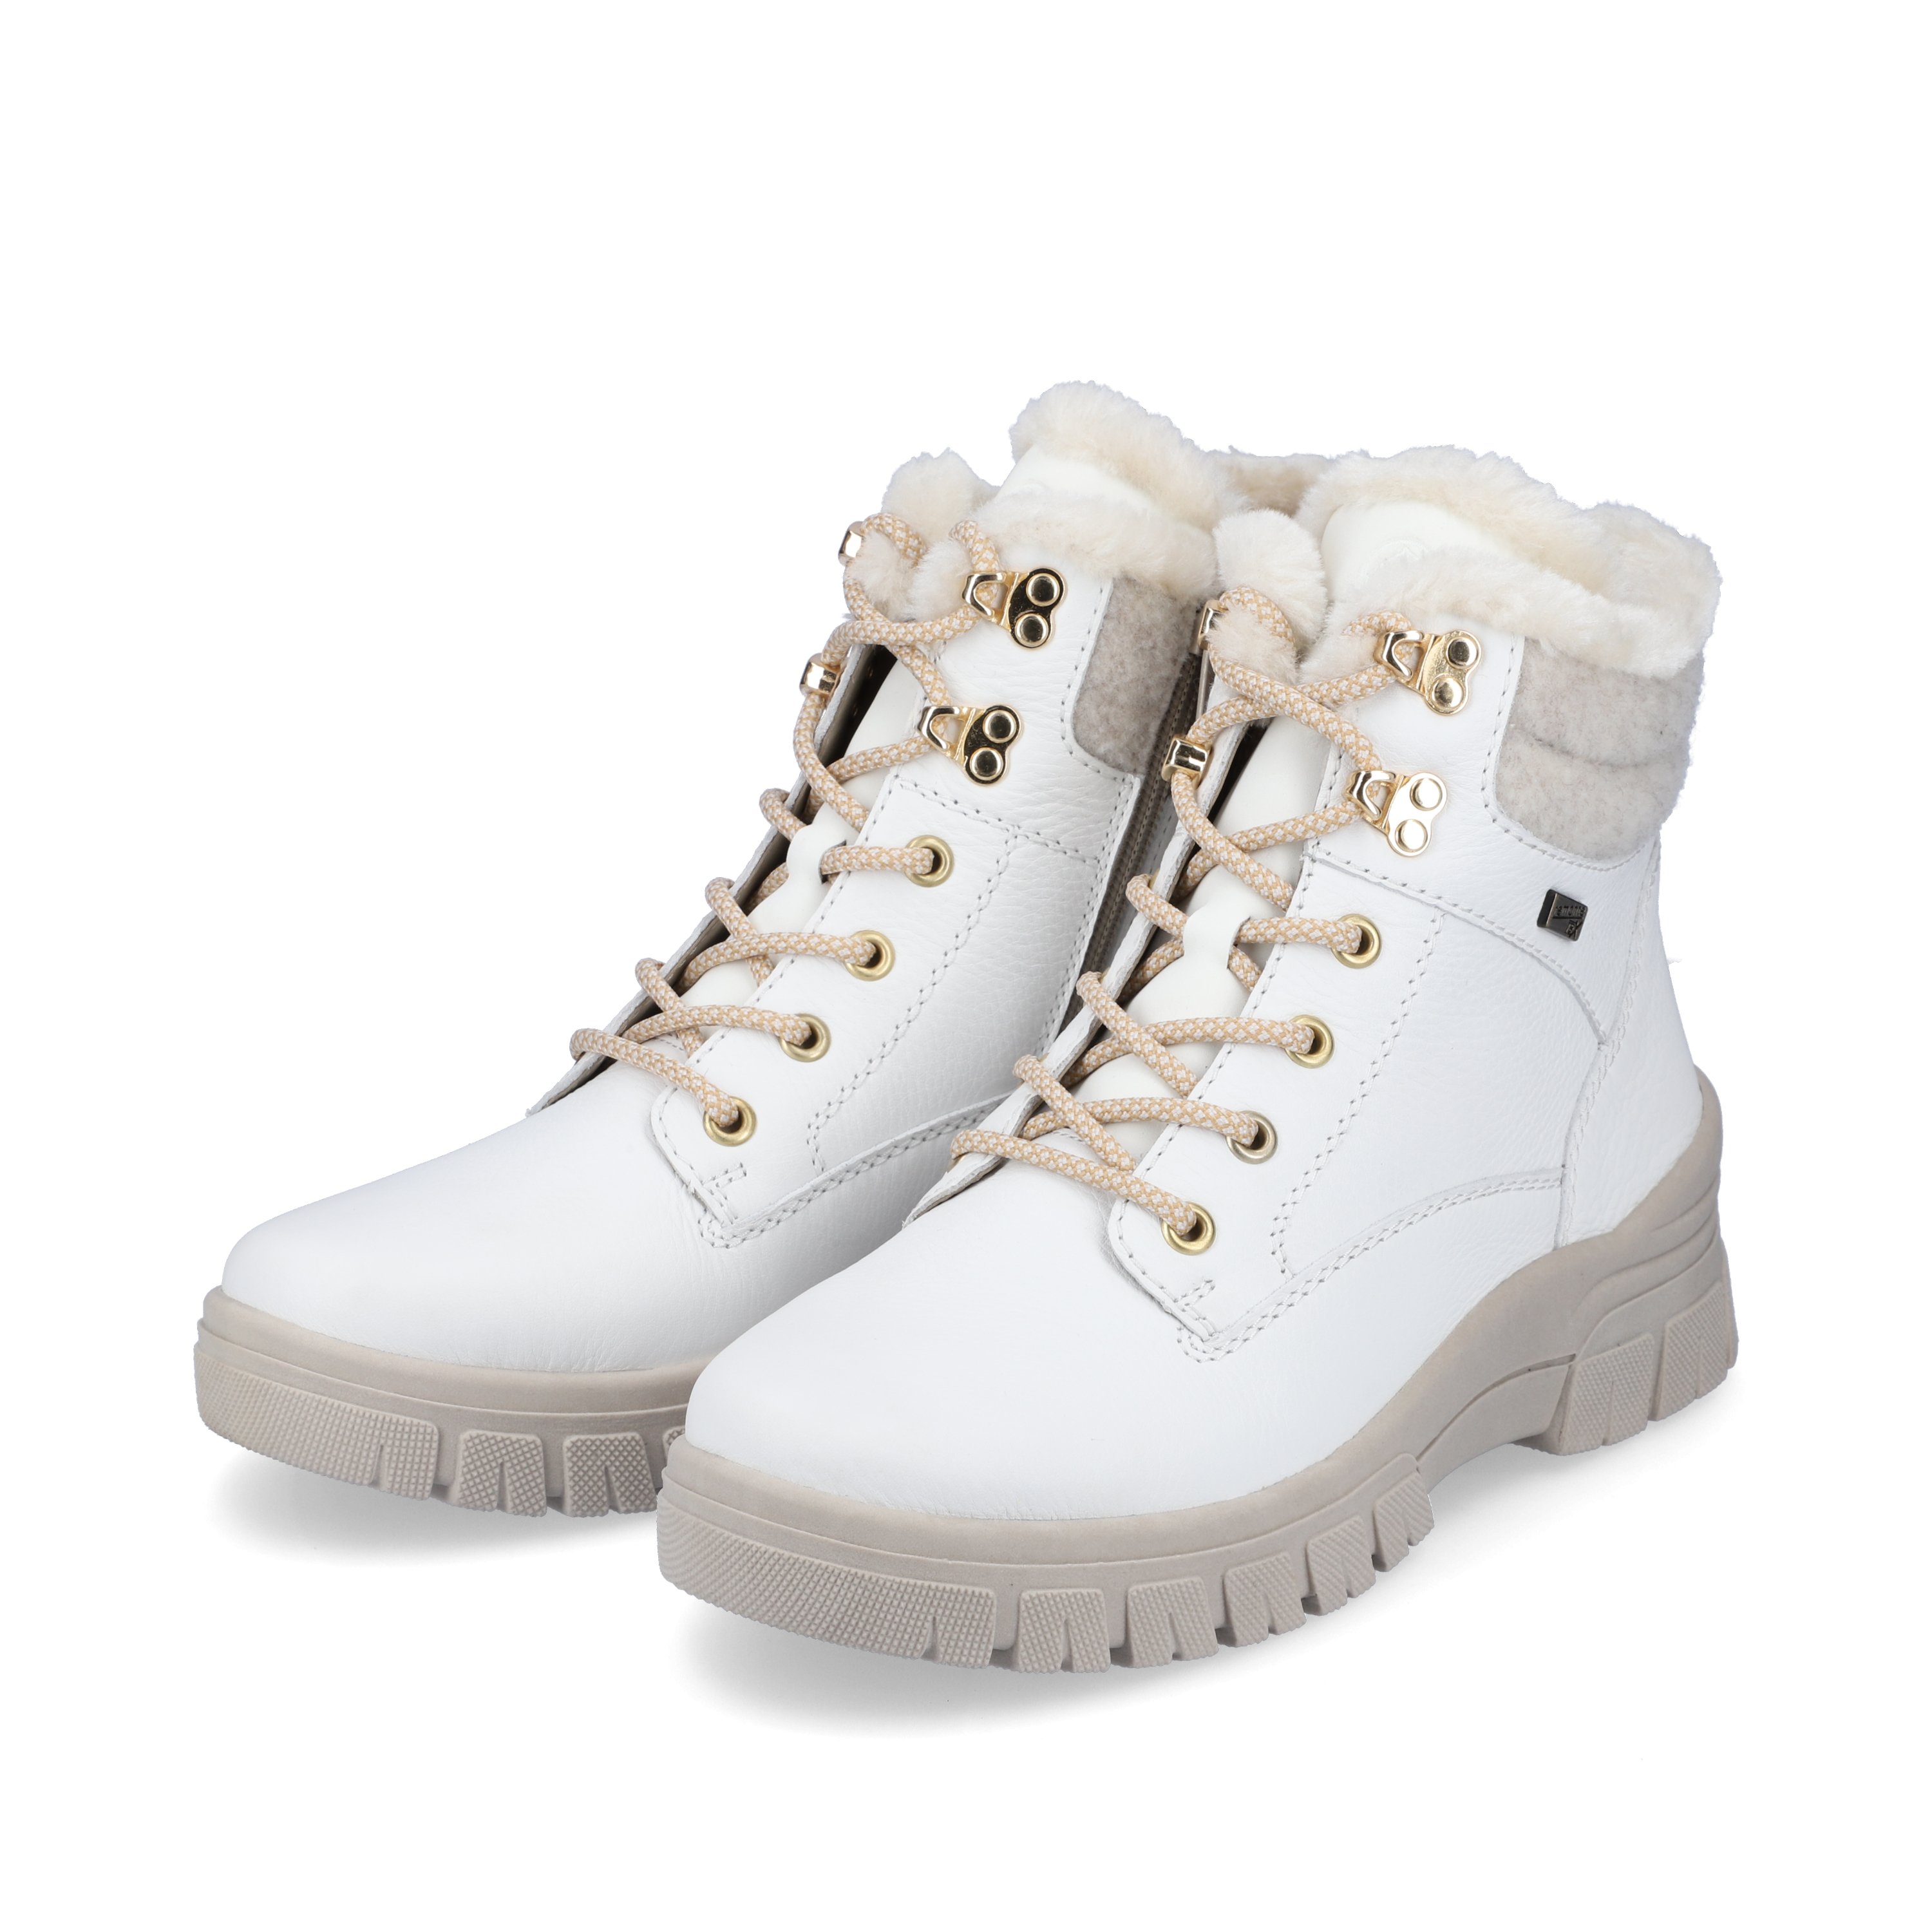 Off-white remonte women´s lace-up boots D0E71-80 with lacing and zipper. Shoe laterally